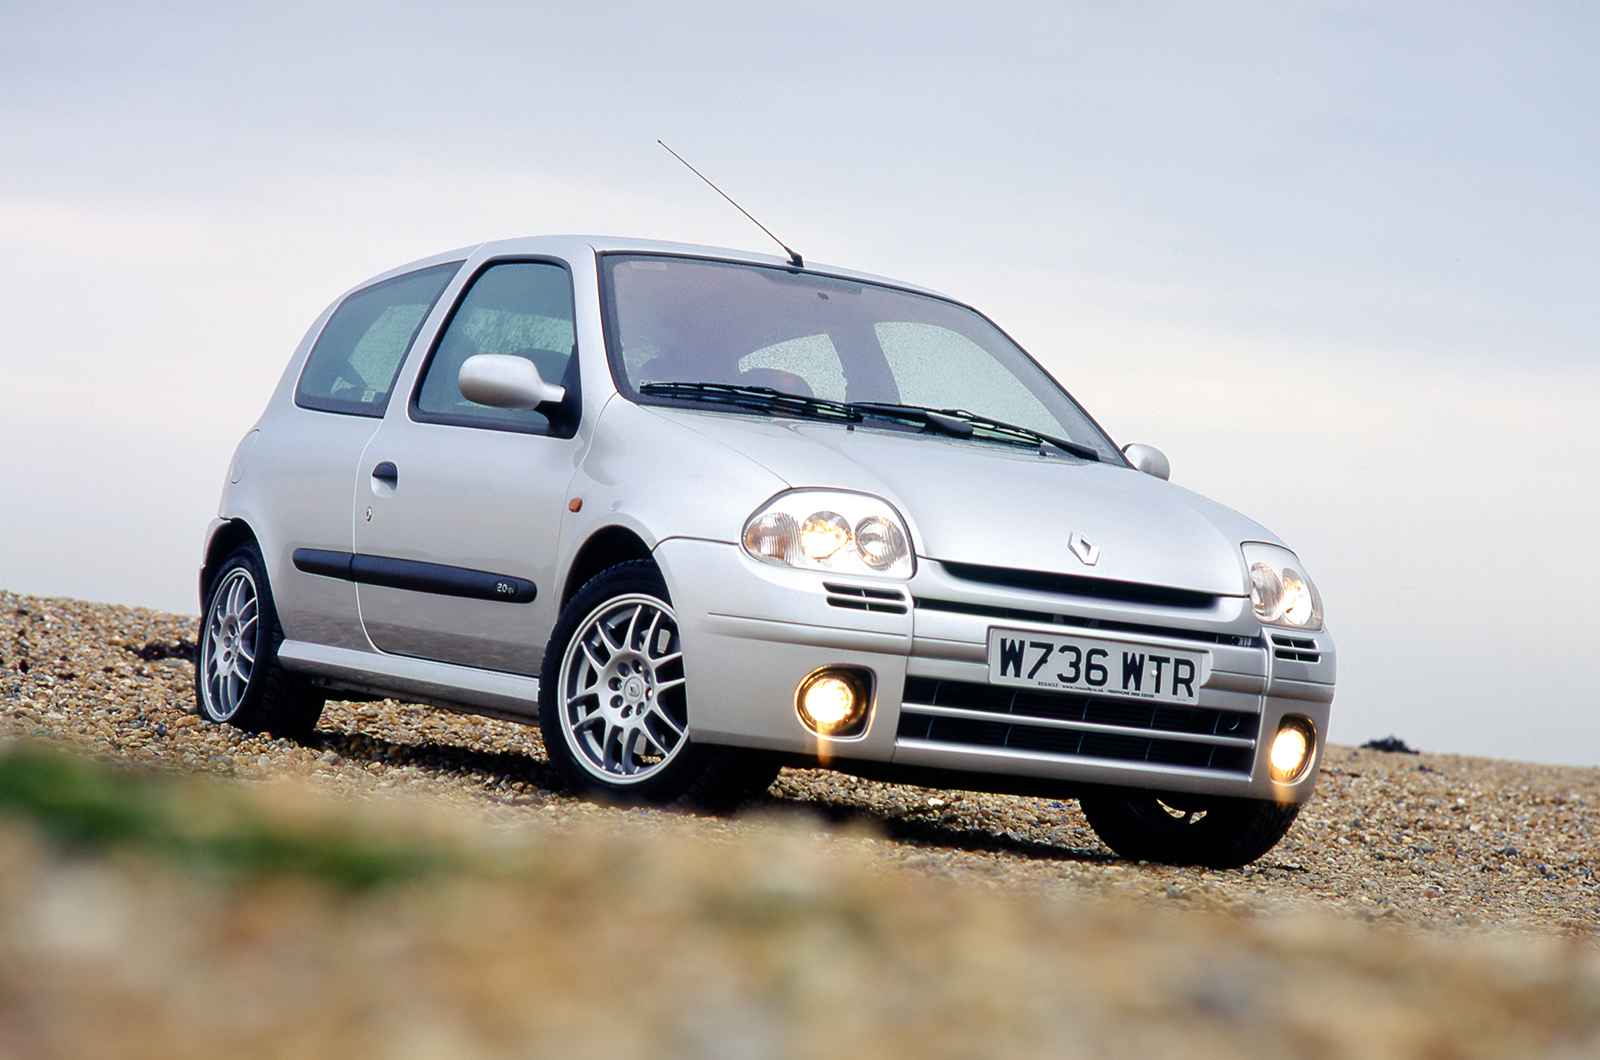 Classic & Sports Car – Buyer’s guide: Renault Clio 172/182